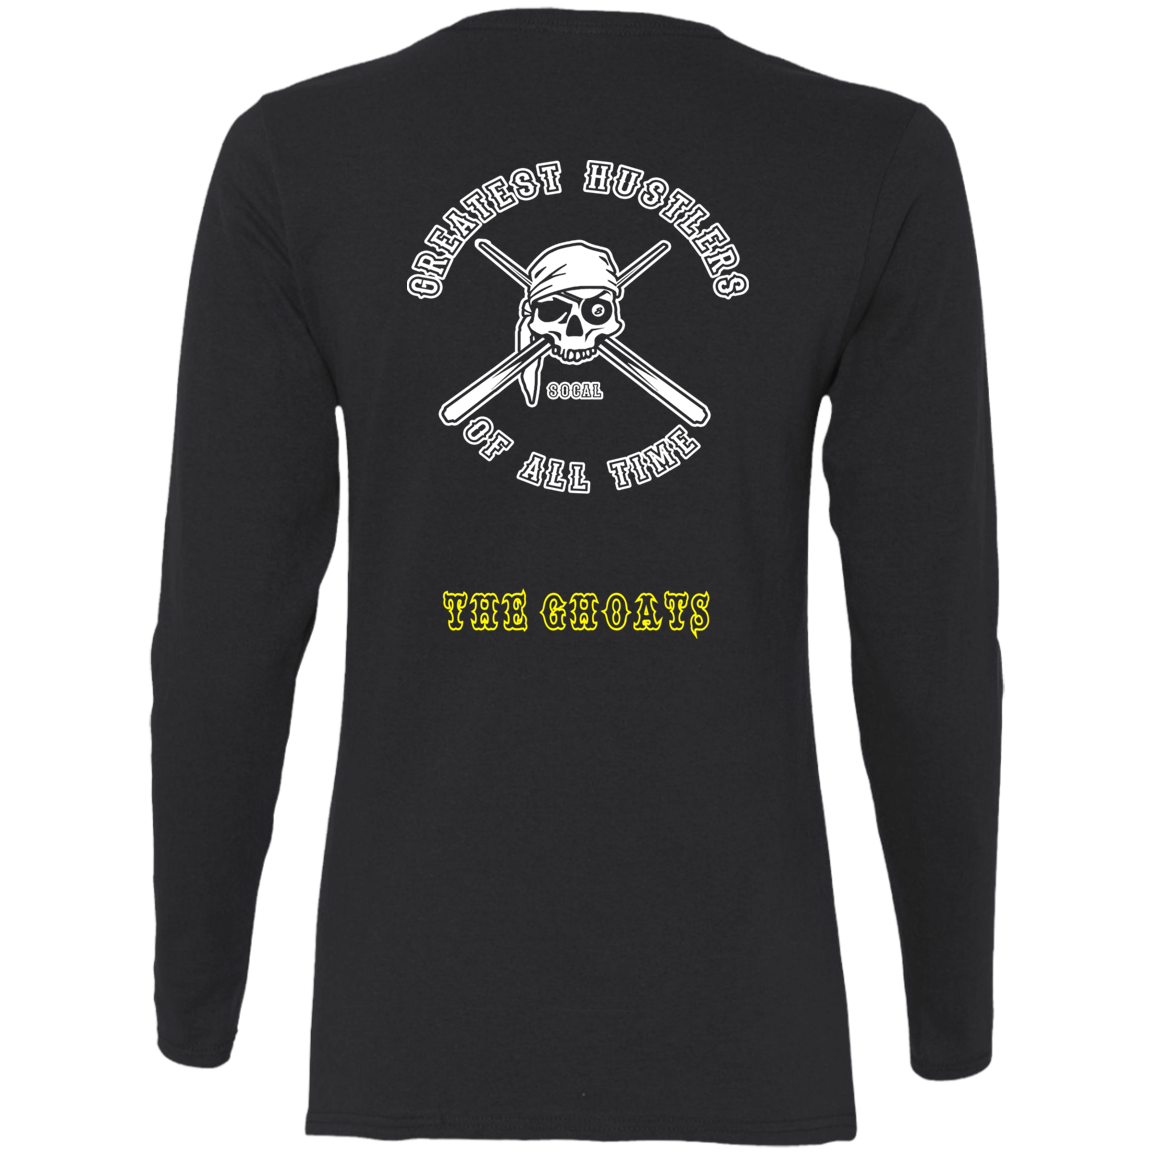 The GHOATS Custom Design. #4 Motorcycle Club Style. Ver 1/2. Ladies' Cotton LS T-Shirt